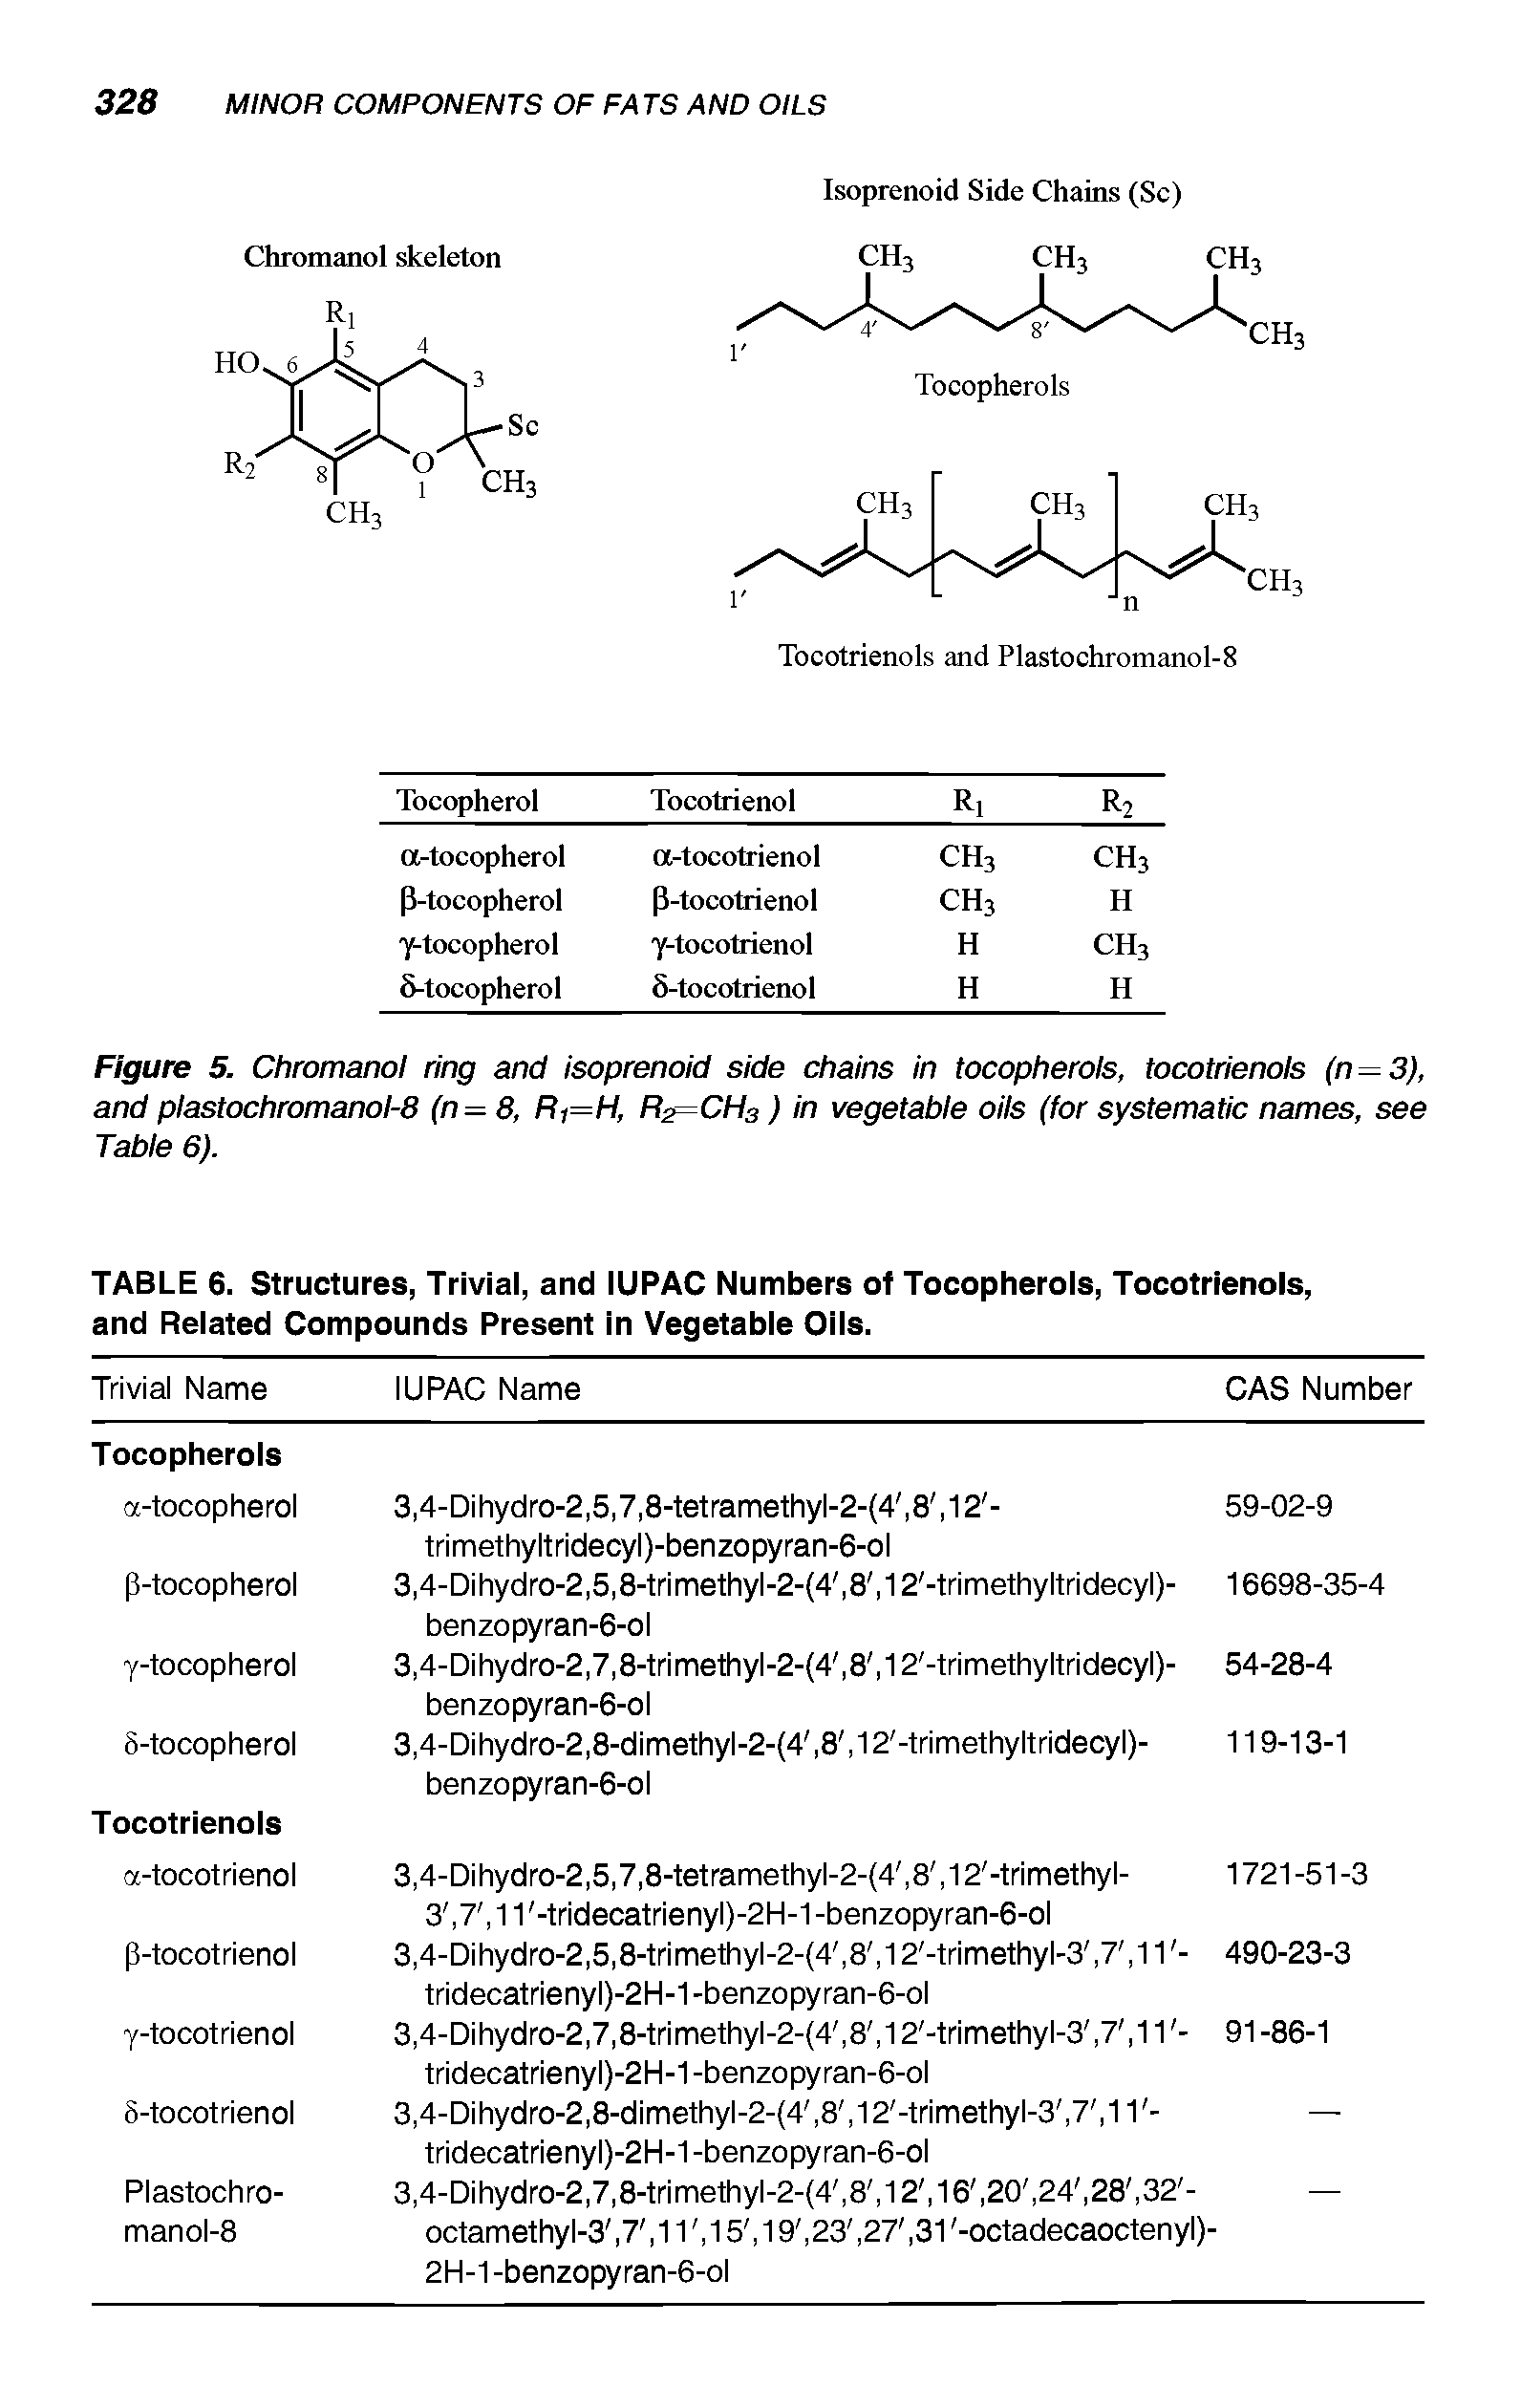 Figure 5. Chromanol ring and isoprenoid side chains in tocopherols, tocotrienols (n = 3), and plastochromanol-8 (n=8, R)=H, R2=CH3 ) in vegetable oils (for systematic names, see Table 6).